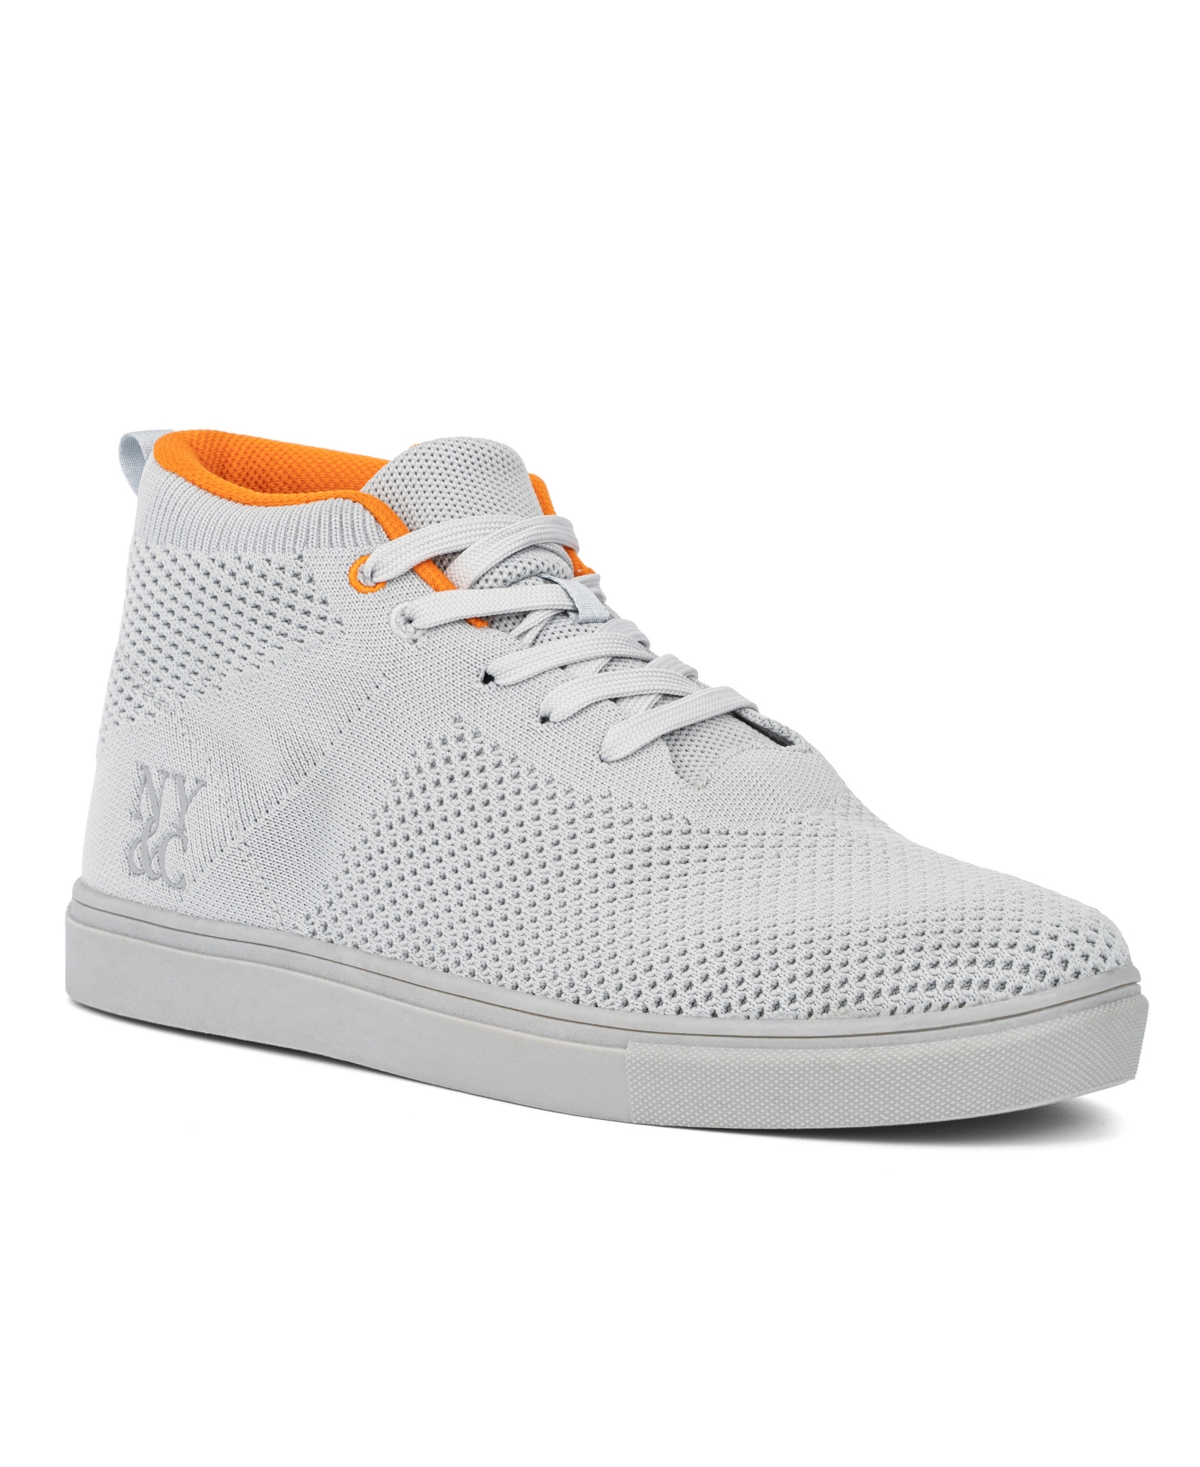 NEW YORK AND COMPANY MEN'S HILL HIGH TOP SNEAKERS MEN'S SHOES